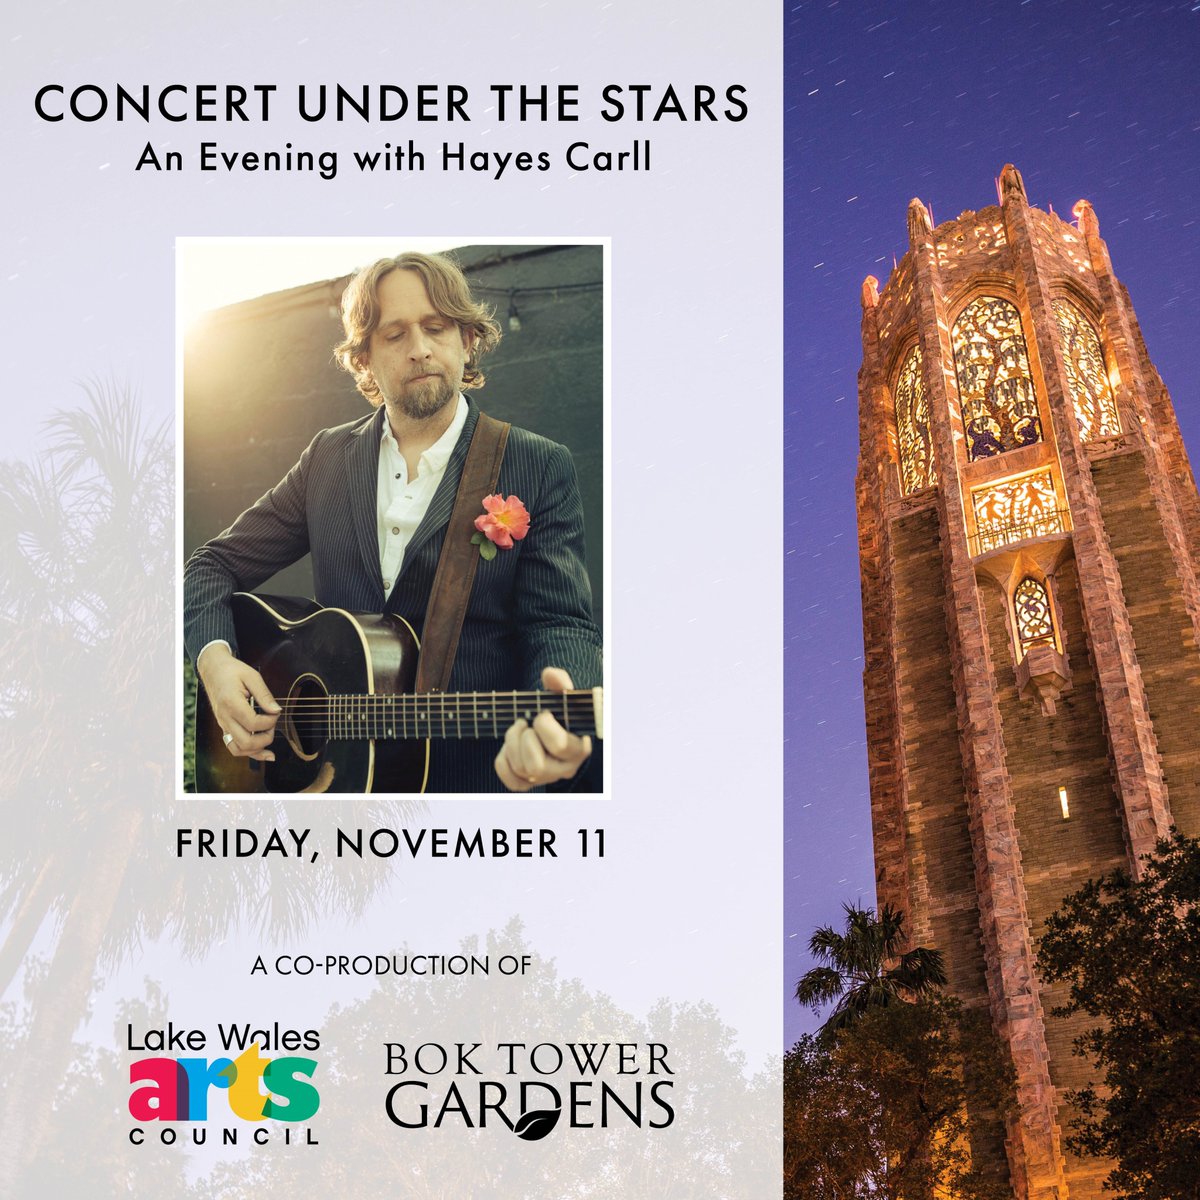 Tickets are on sale now for an evening with me and the band at Concert Under the Stars at Bok Tower Gardens in Lake Wales, FL. Hope to see you there. You can grab your tickets here: bit.ly/HayesCarllLake…